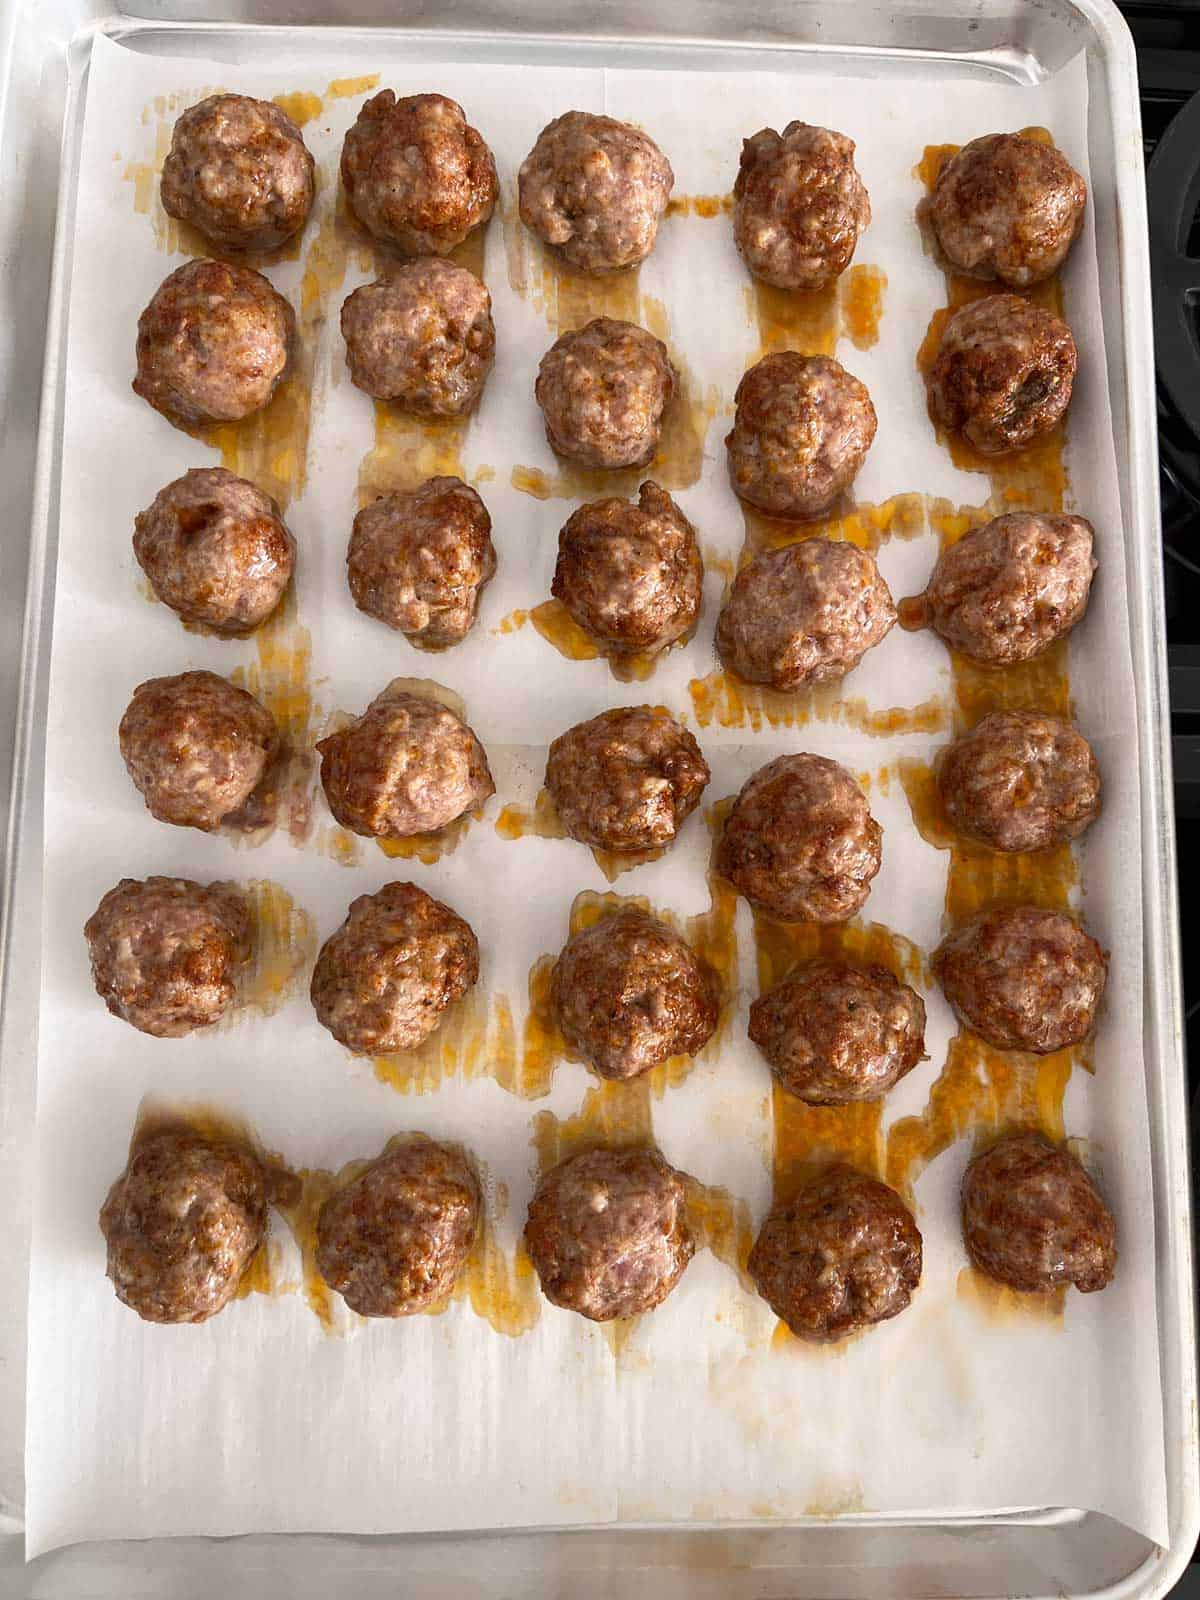 The meatballs are ready in the pan.